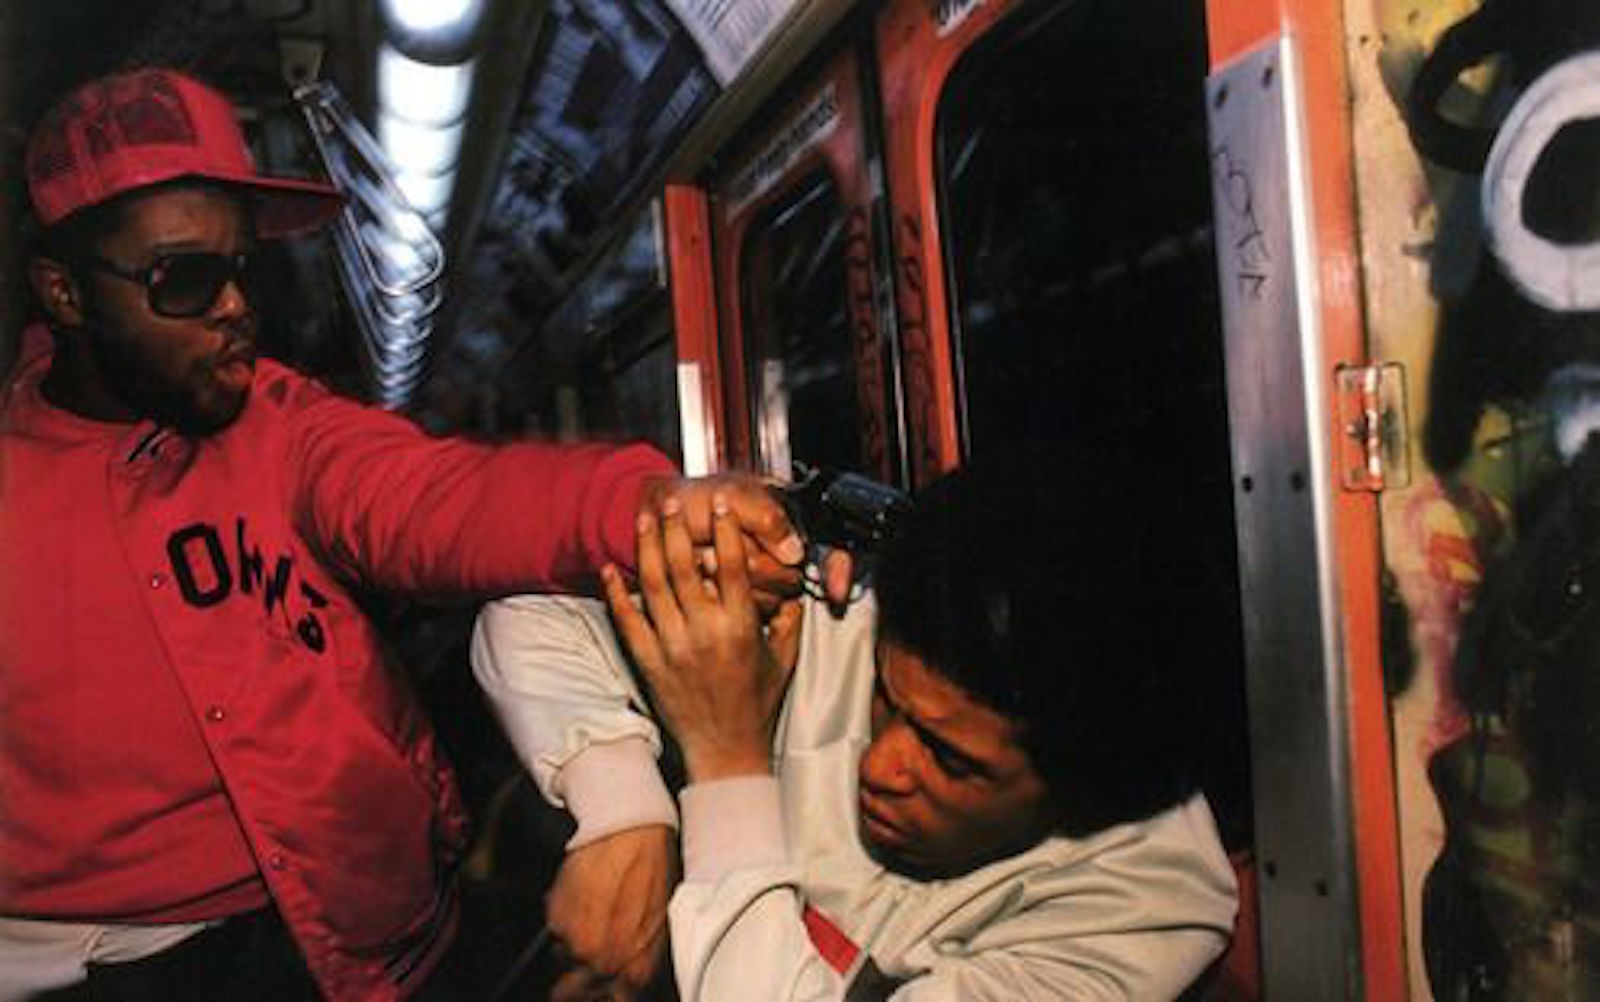 Bruce Davidson's sexy & scary subway photos – Public Delivery